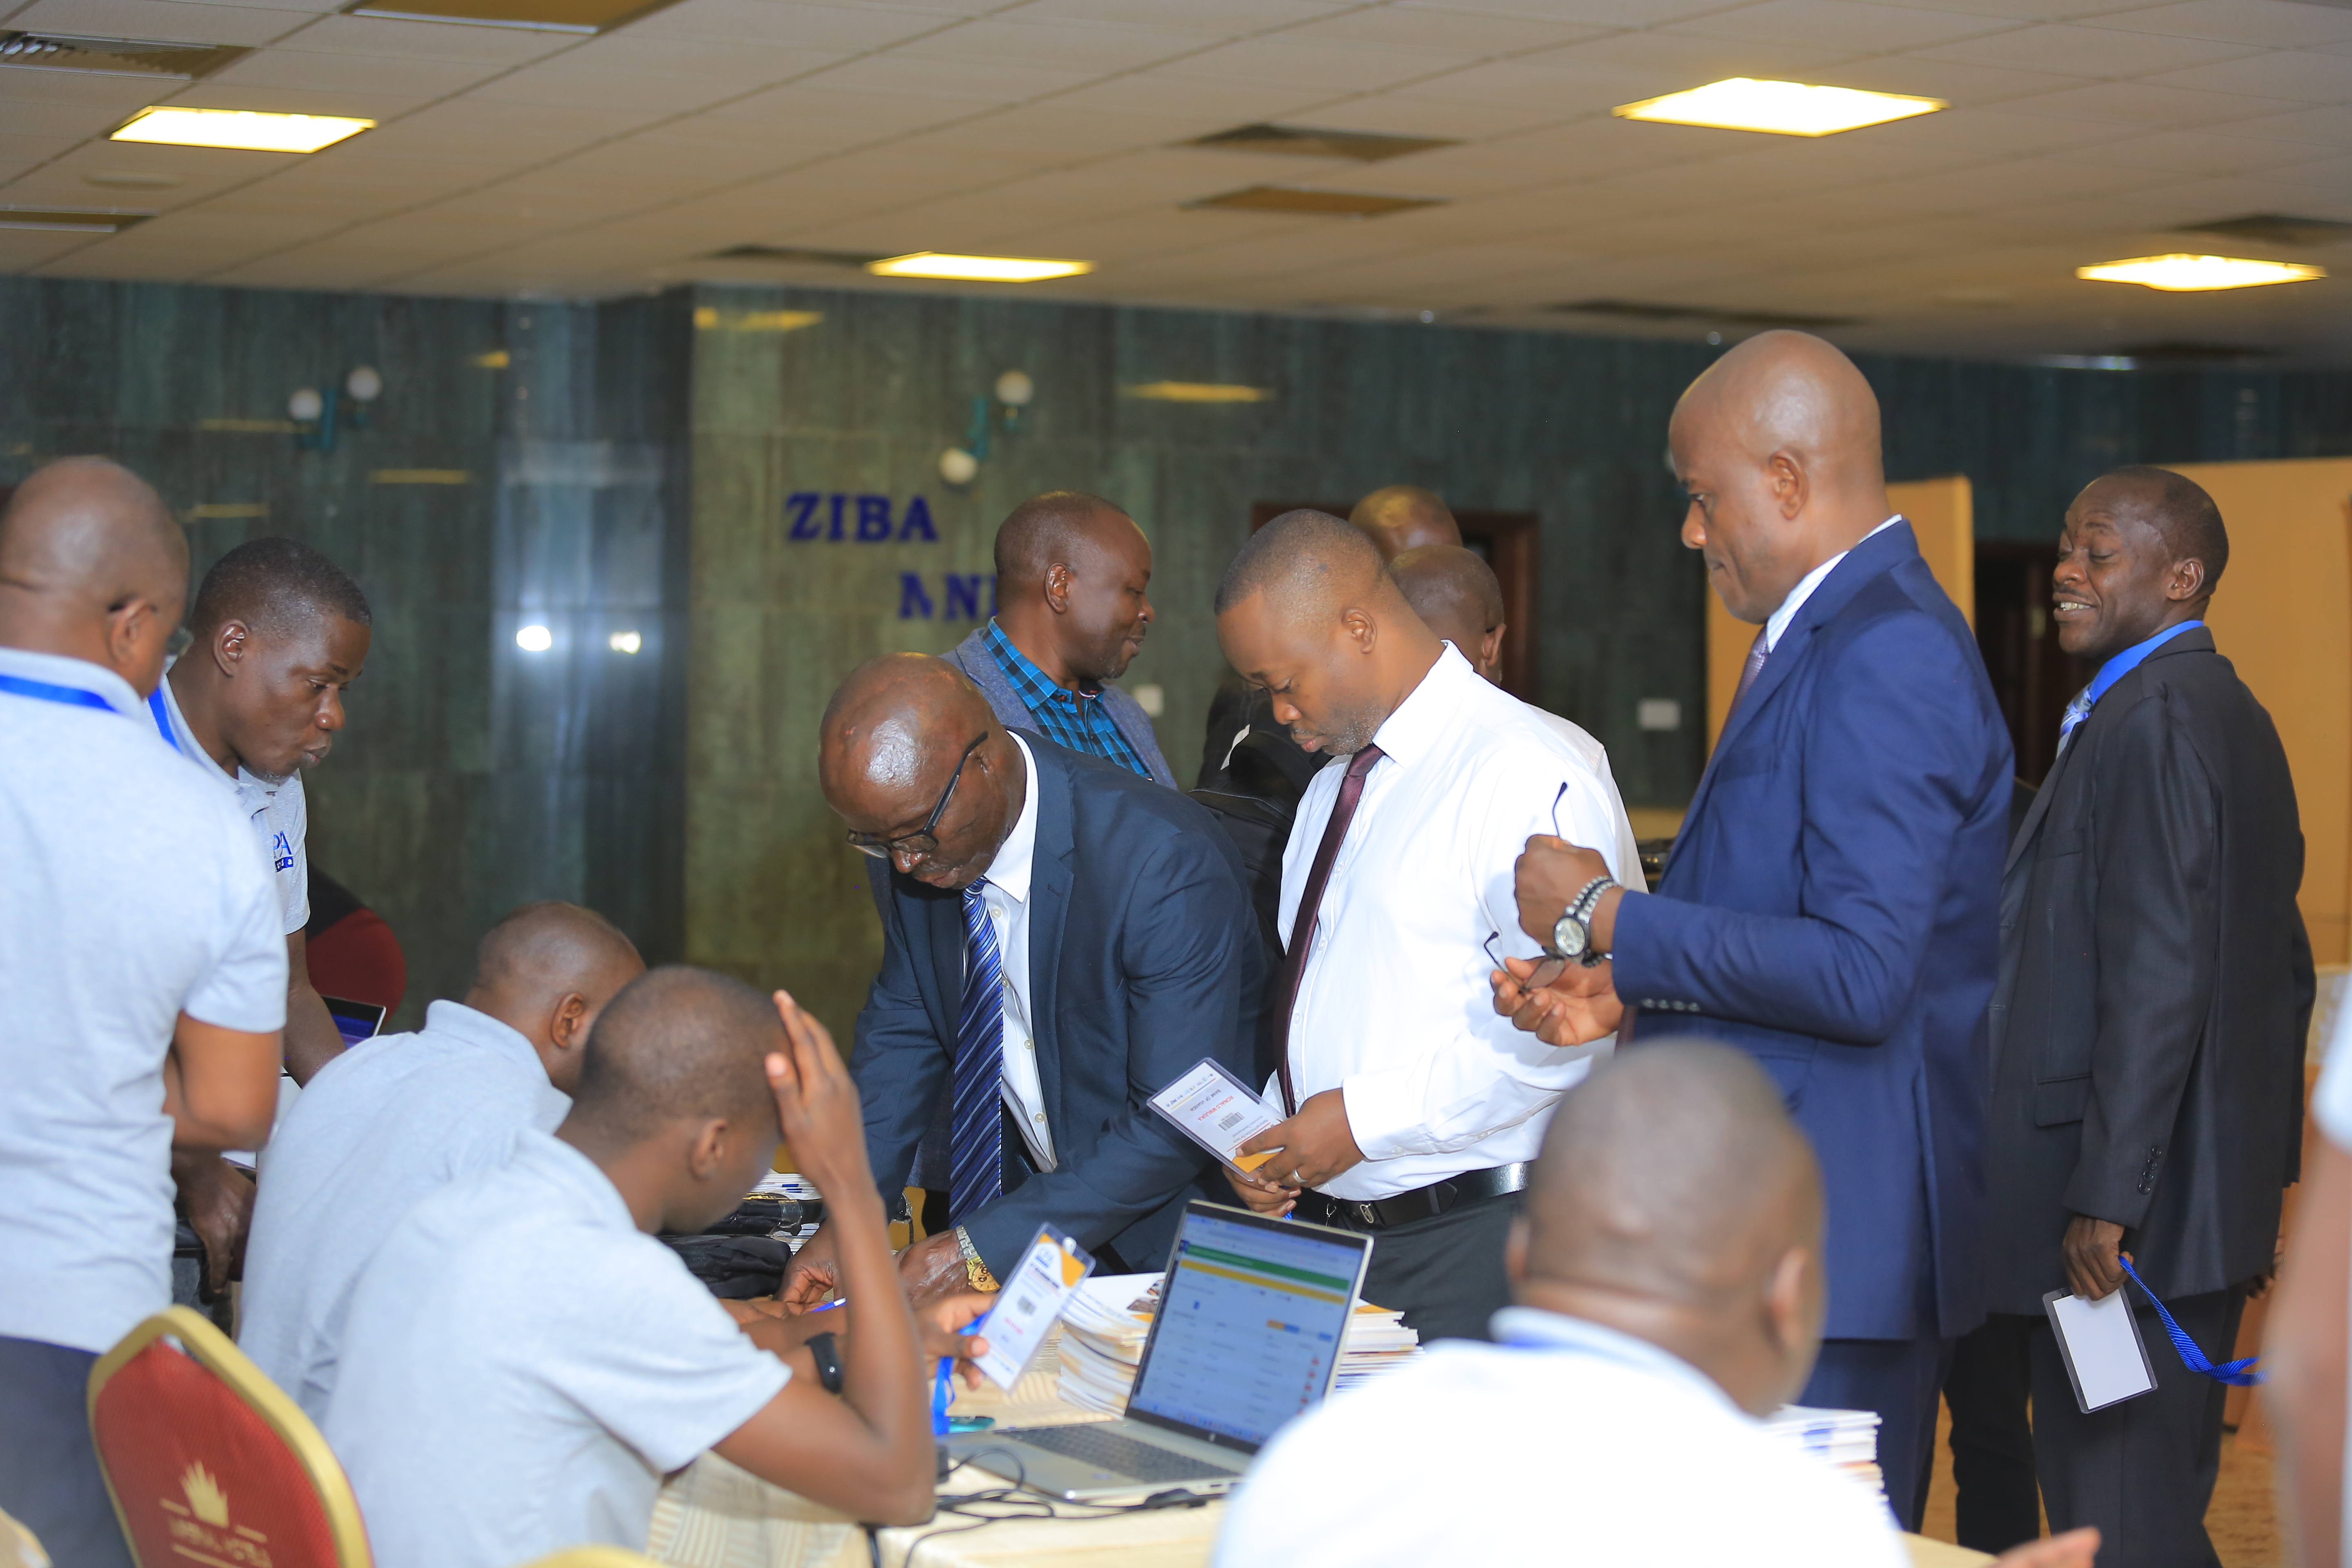 Some of the participants registering at the 11th CPA Economic Forum